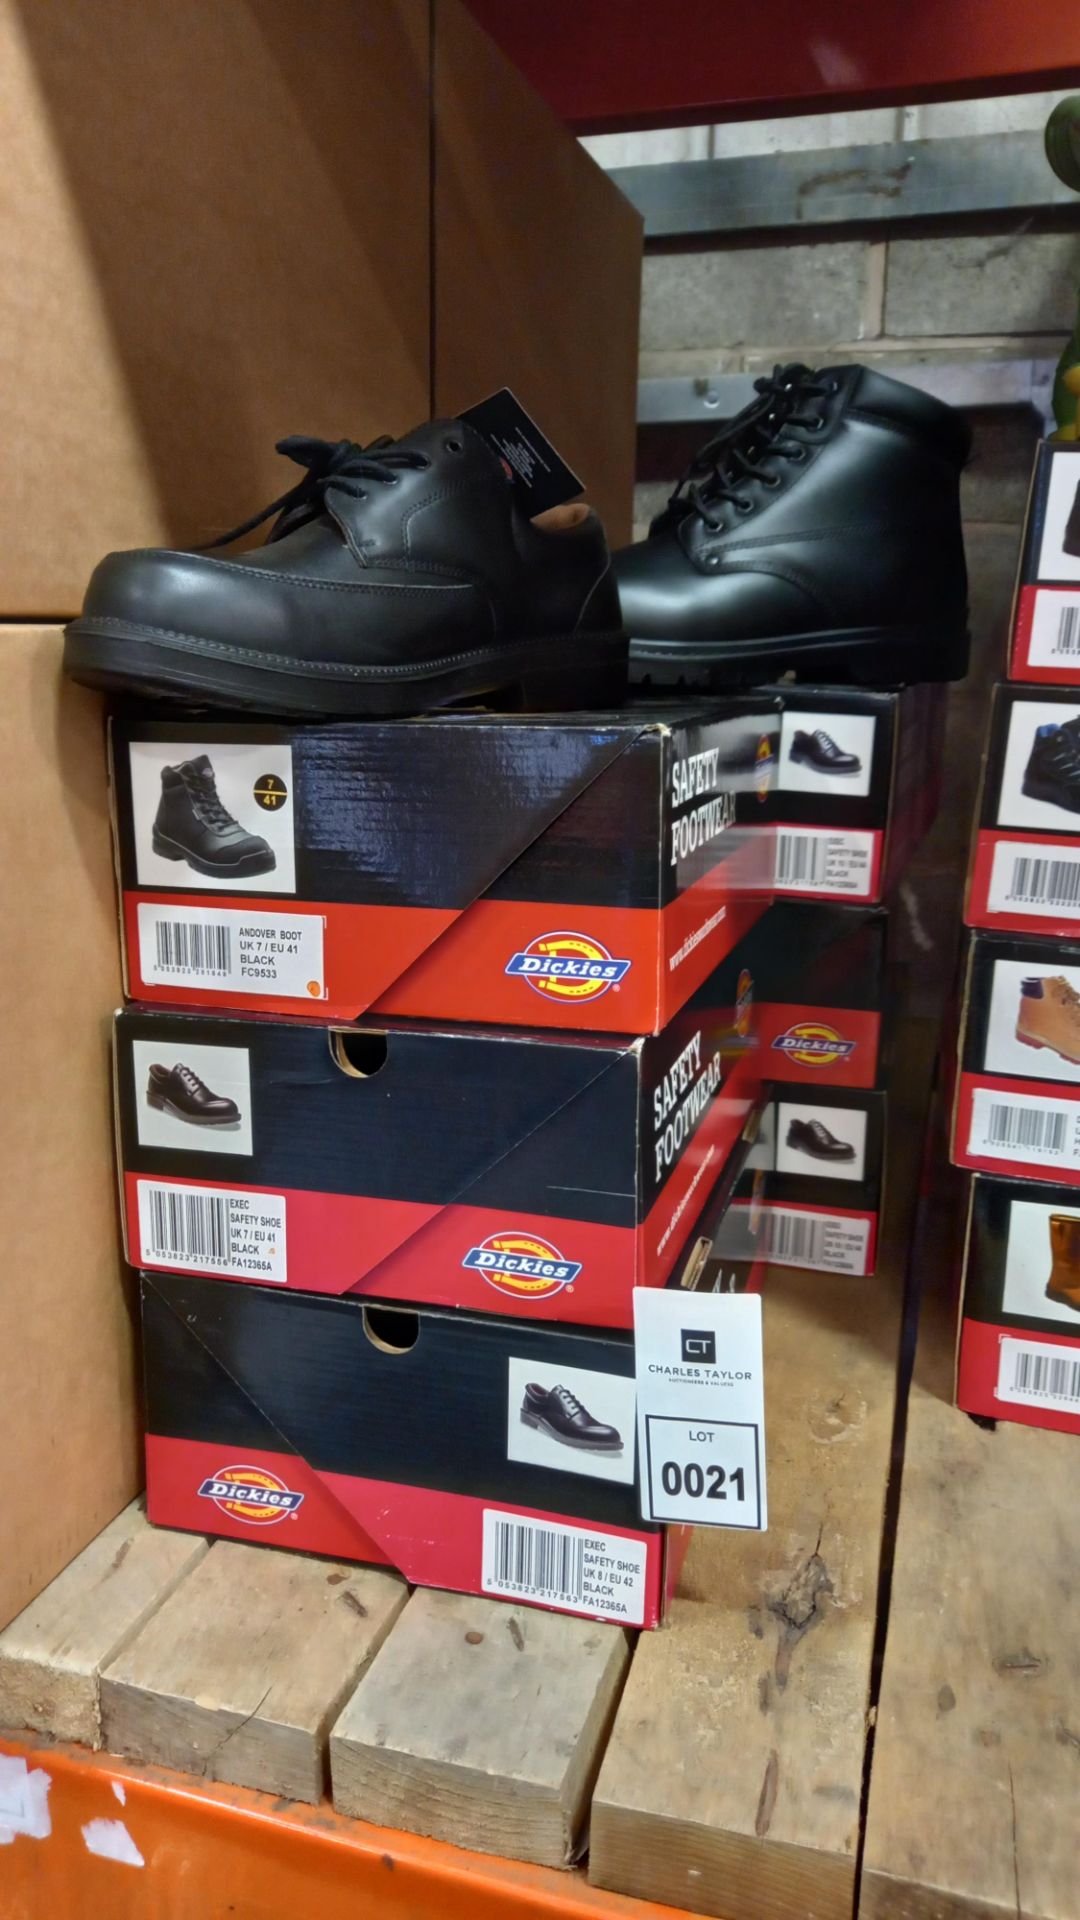 6 PIECE MIXED DICKIES BOOT LOT CONTAINING 4 X SAFETY SHOES IN BLACK AND1 X EVERYDAY SAFETY SHOES